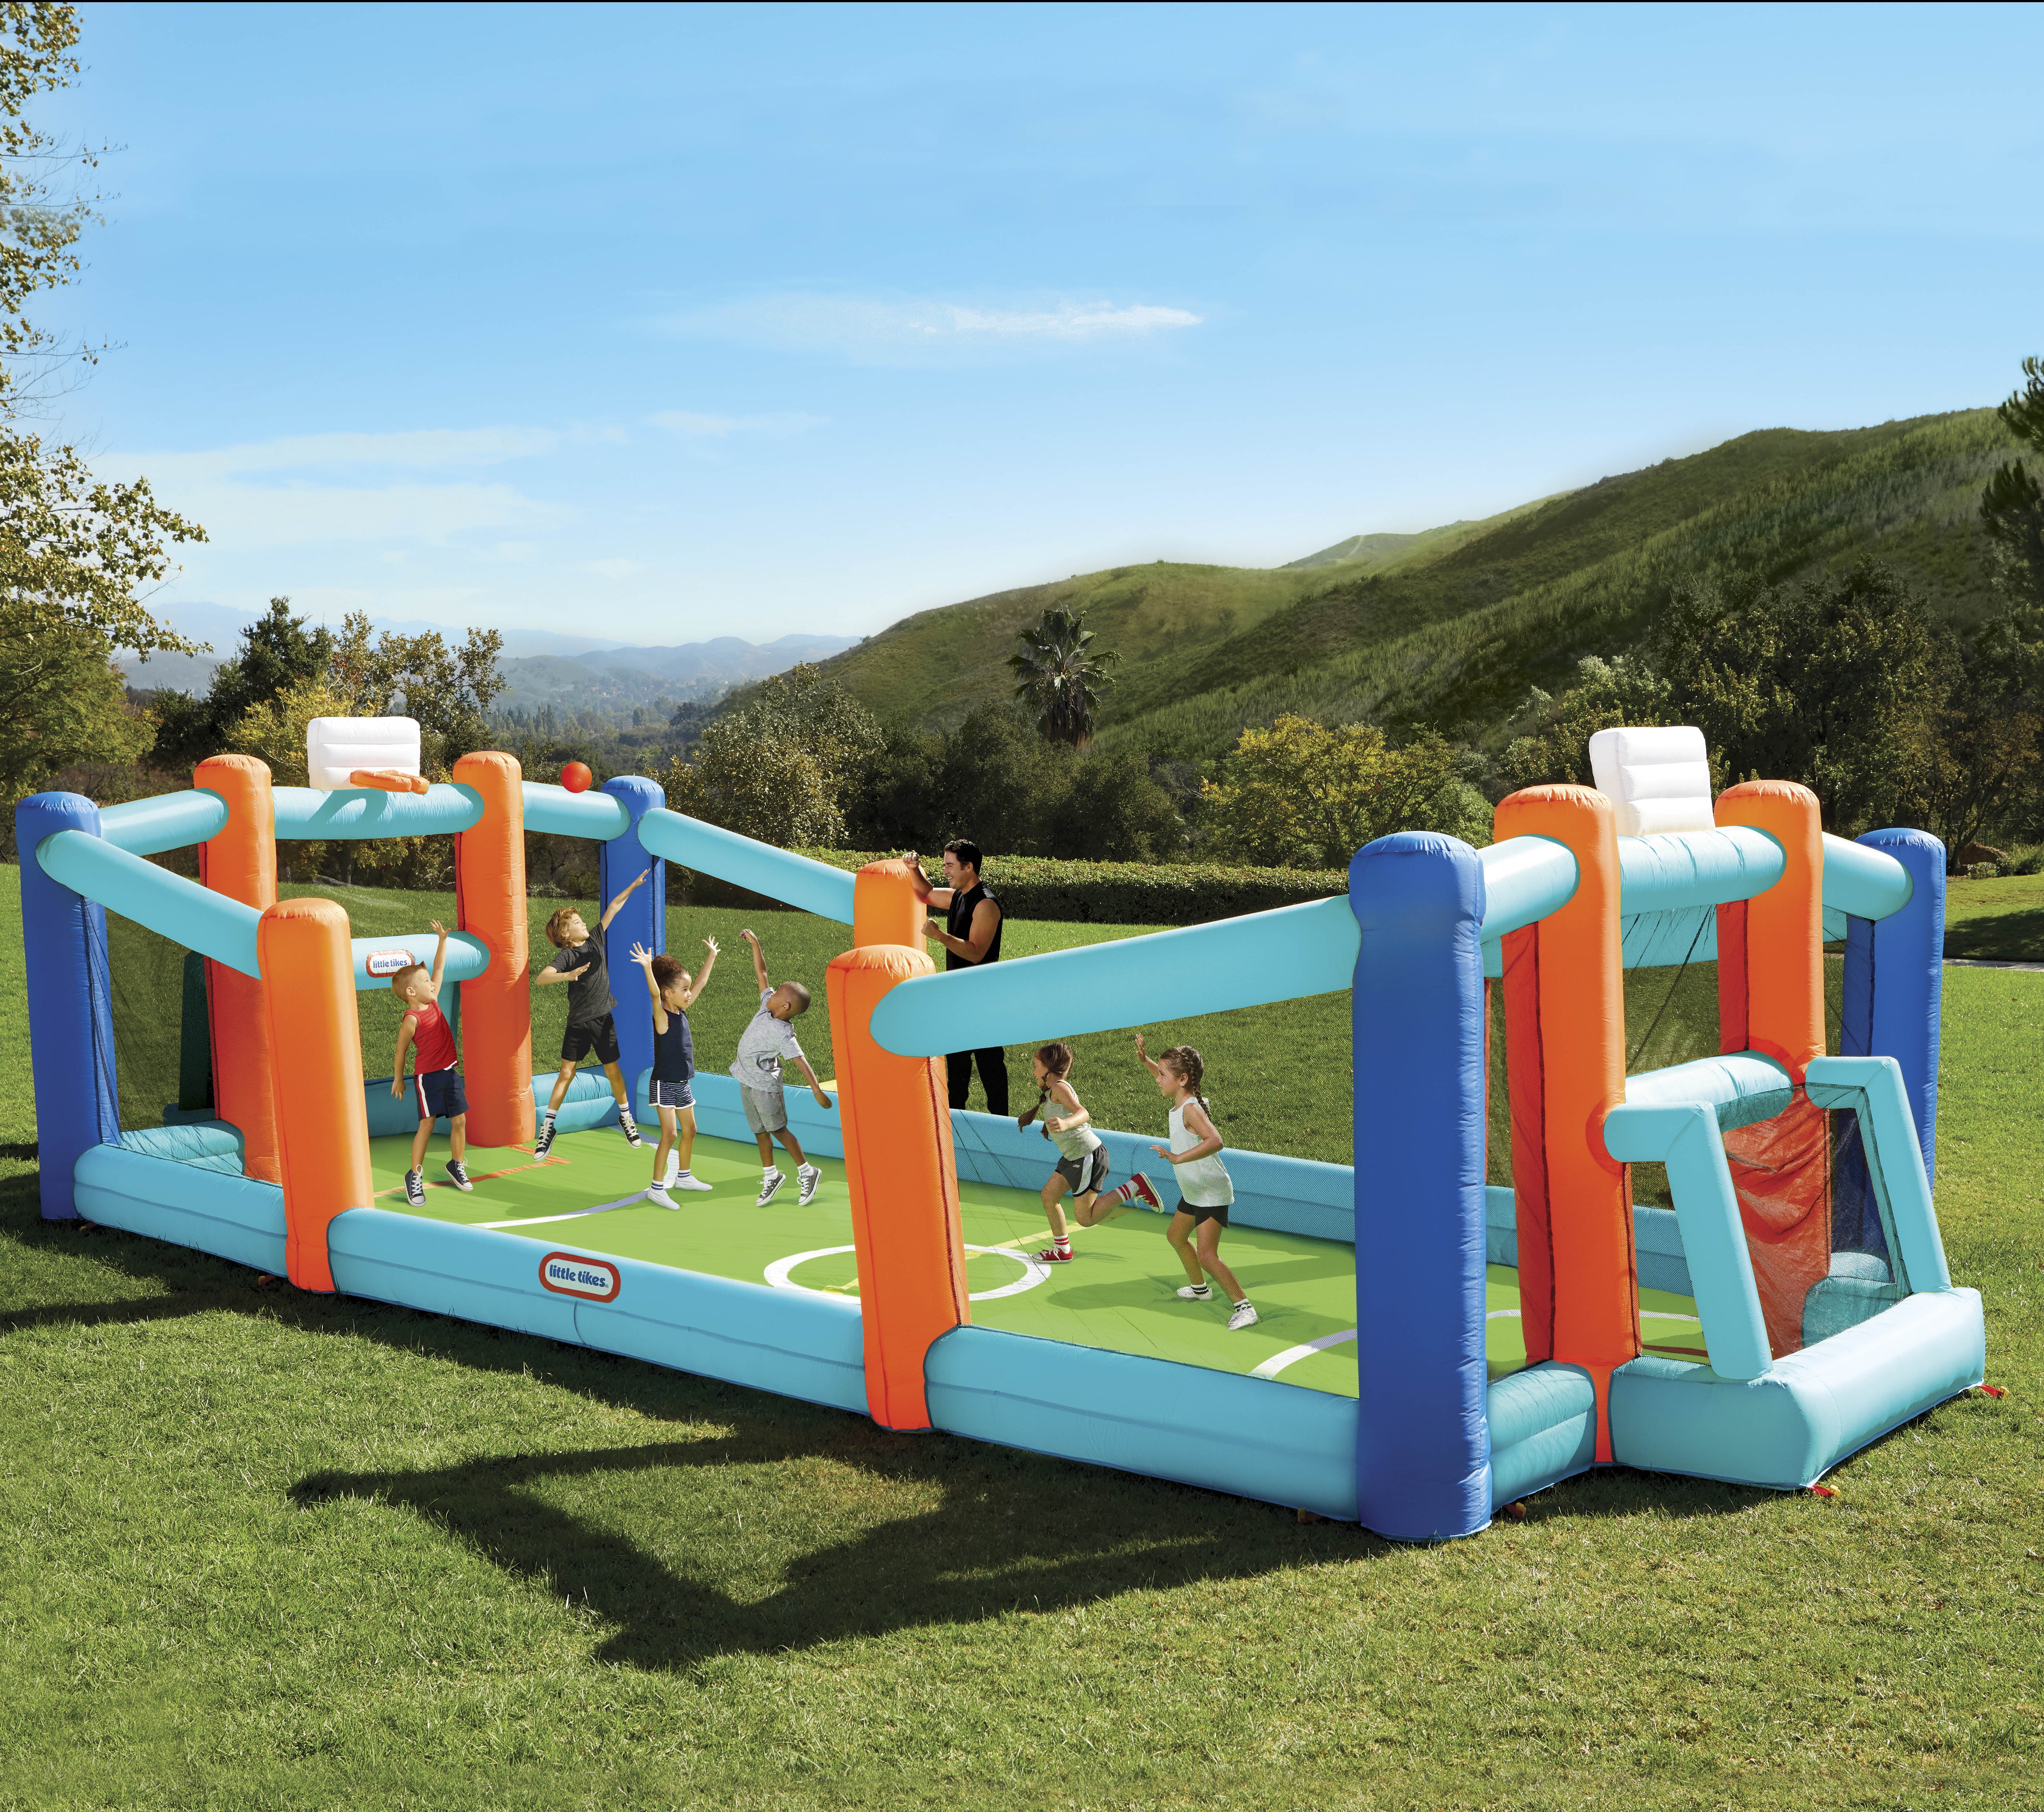 Little Tikes Huge 24' L x 12' W x 7' H Inflatable Sports Bouncer